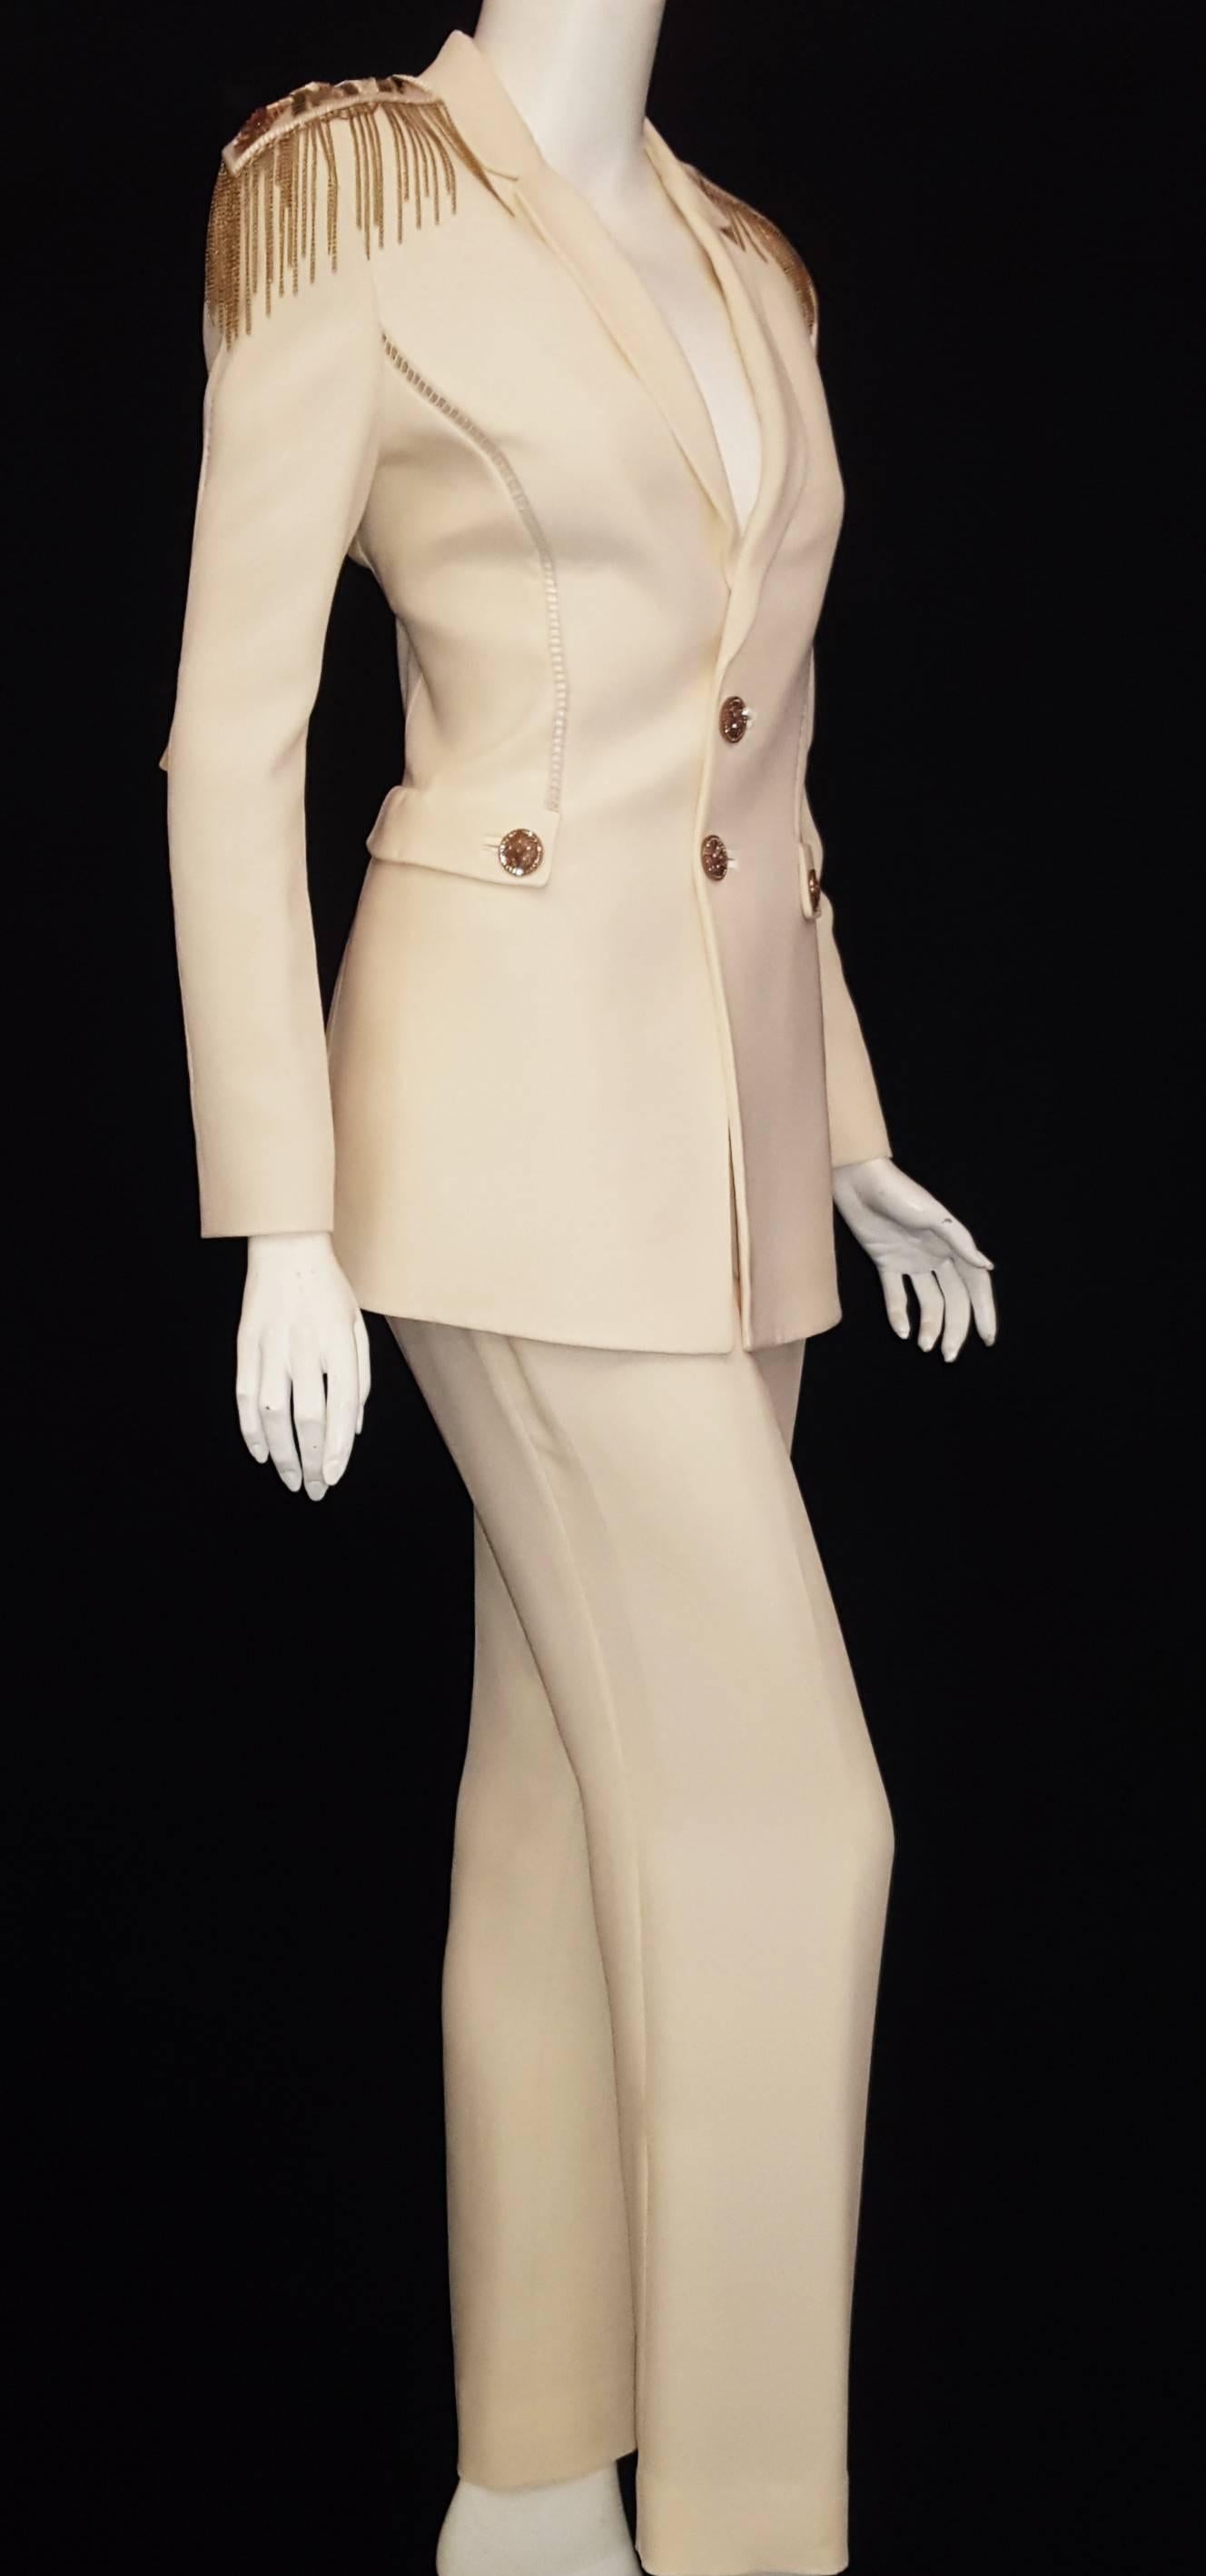 Versace cream pant suit hails from Milan's Fashion week for Autumn/Winter 2014.   This trouser suit is single breasted and to the hip and the pants that have a slight flair and front zipper for closure.  The cream color crisp trouser suit means